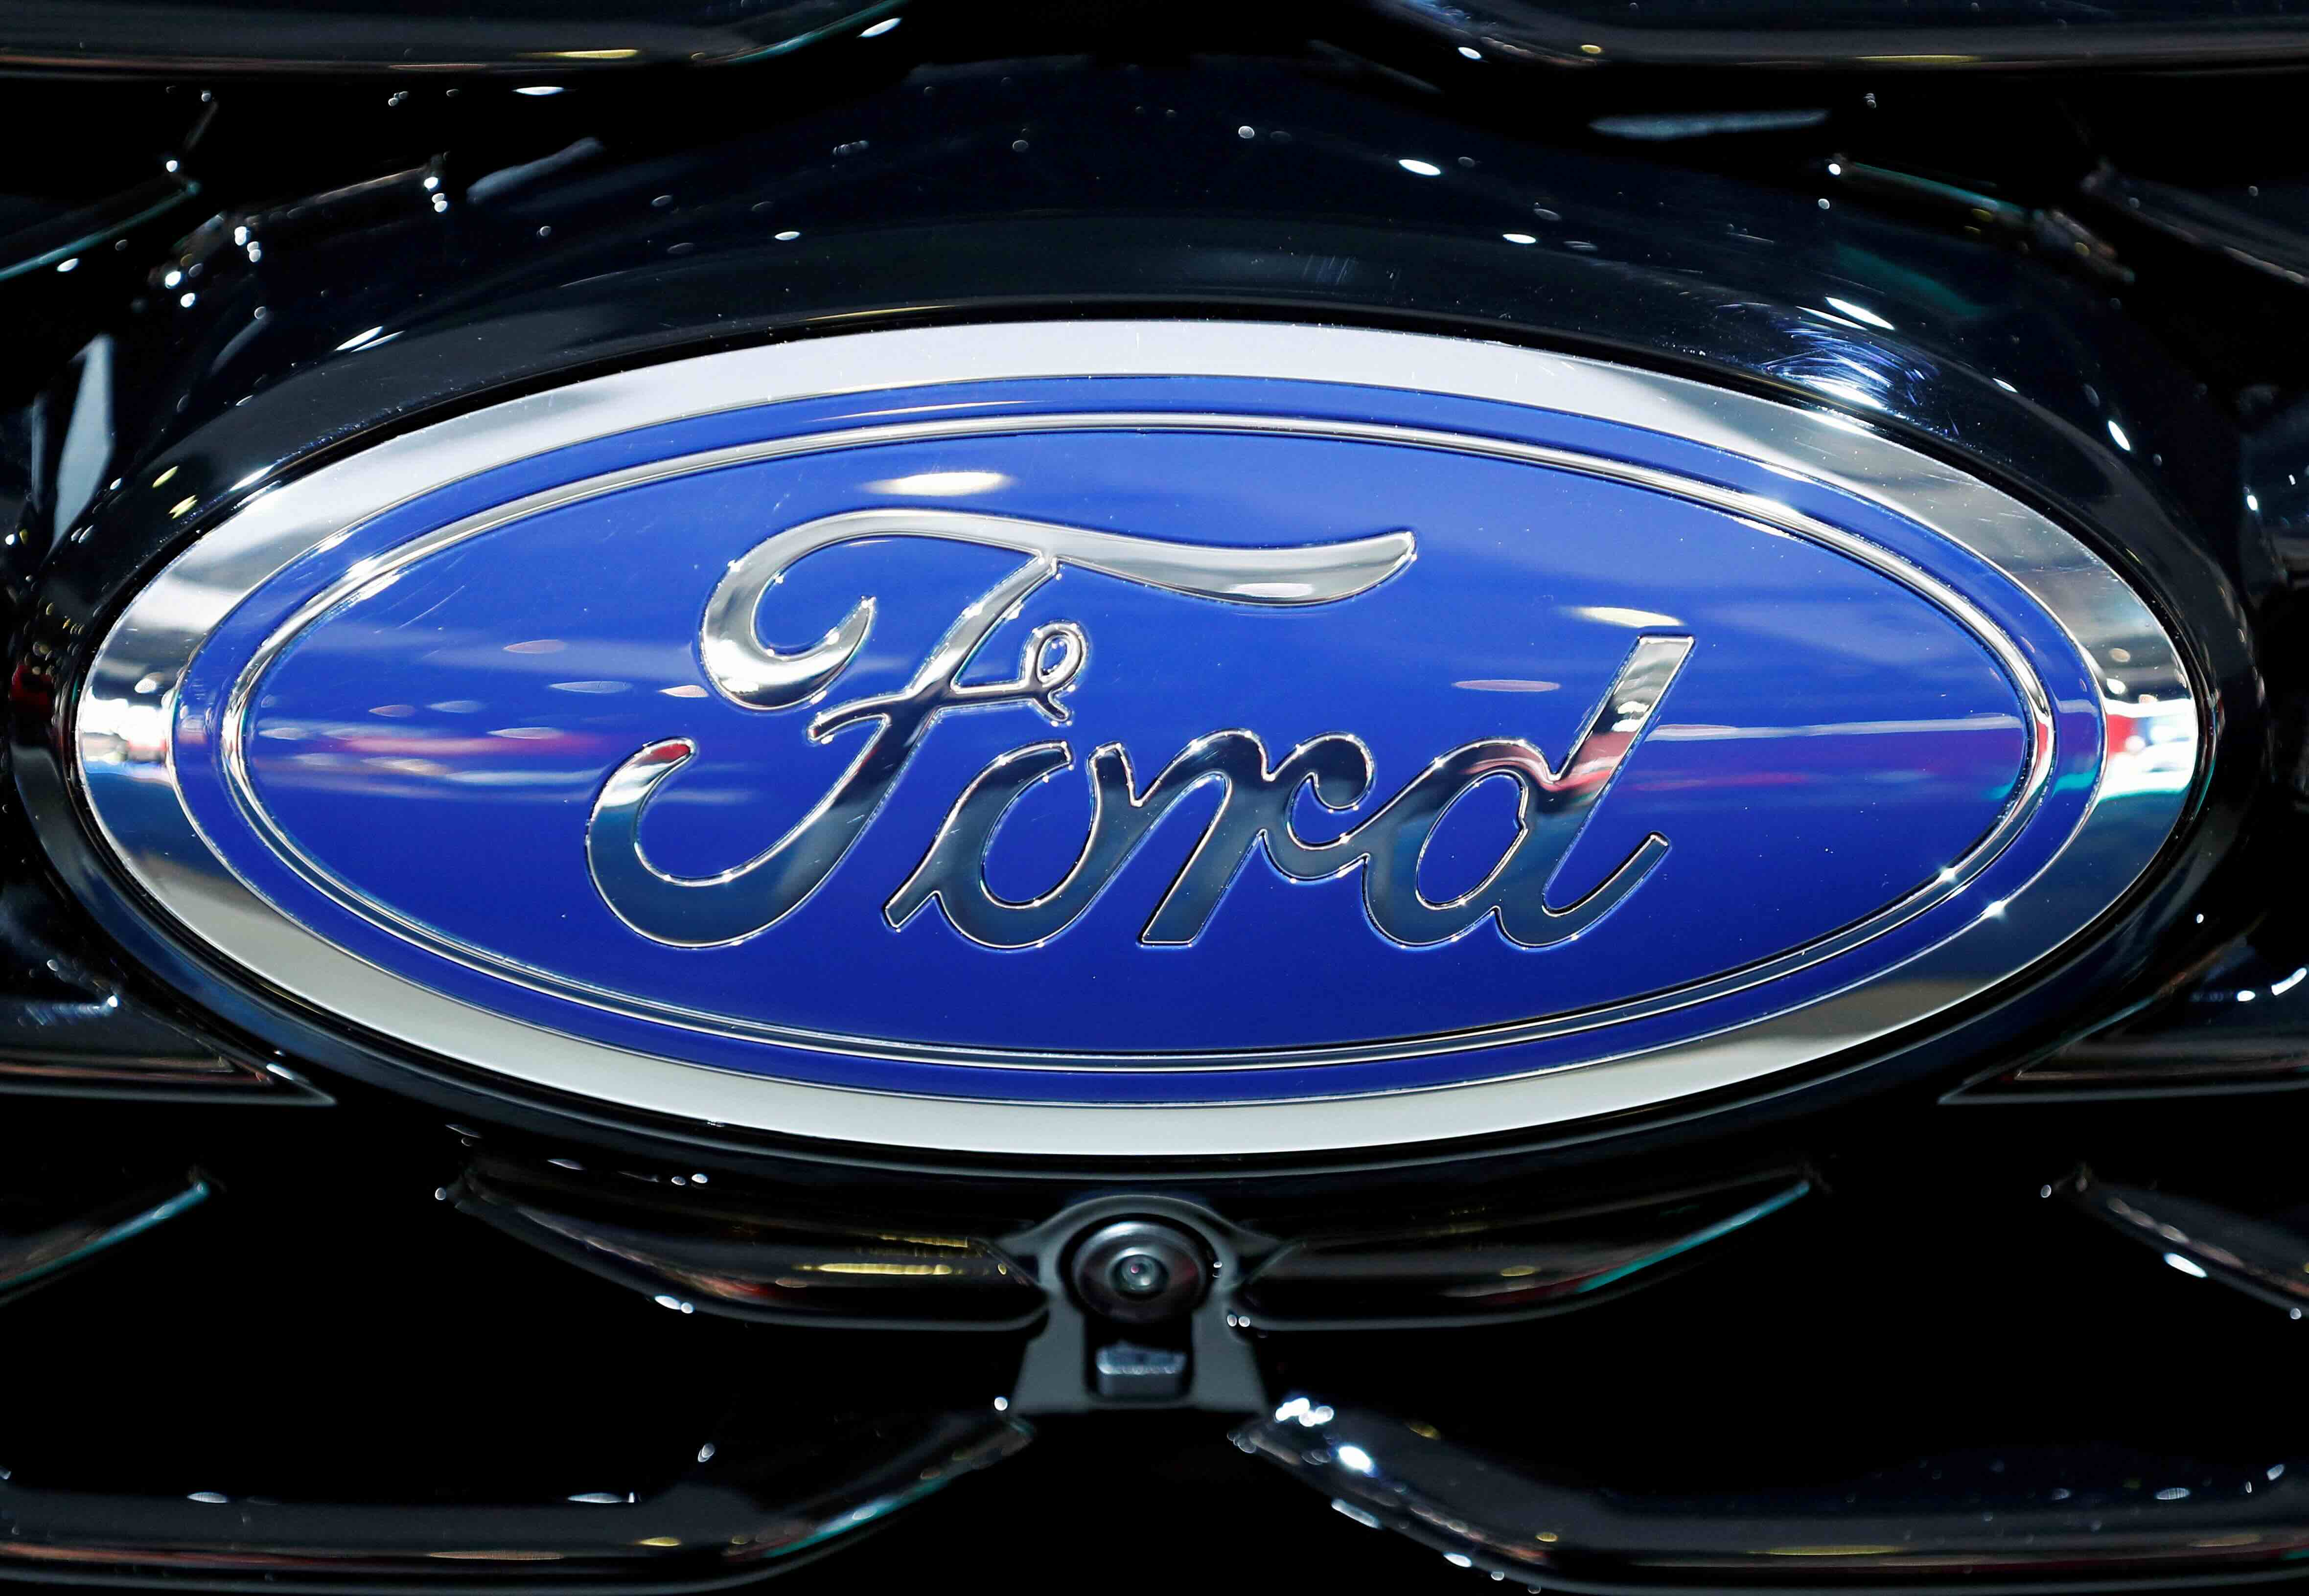 Ford Motor F.N is recalling 668,000 F-150 pickup trucks worldwide from the 2014 model year